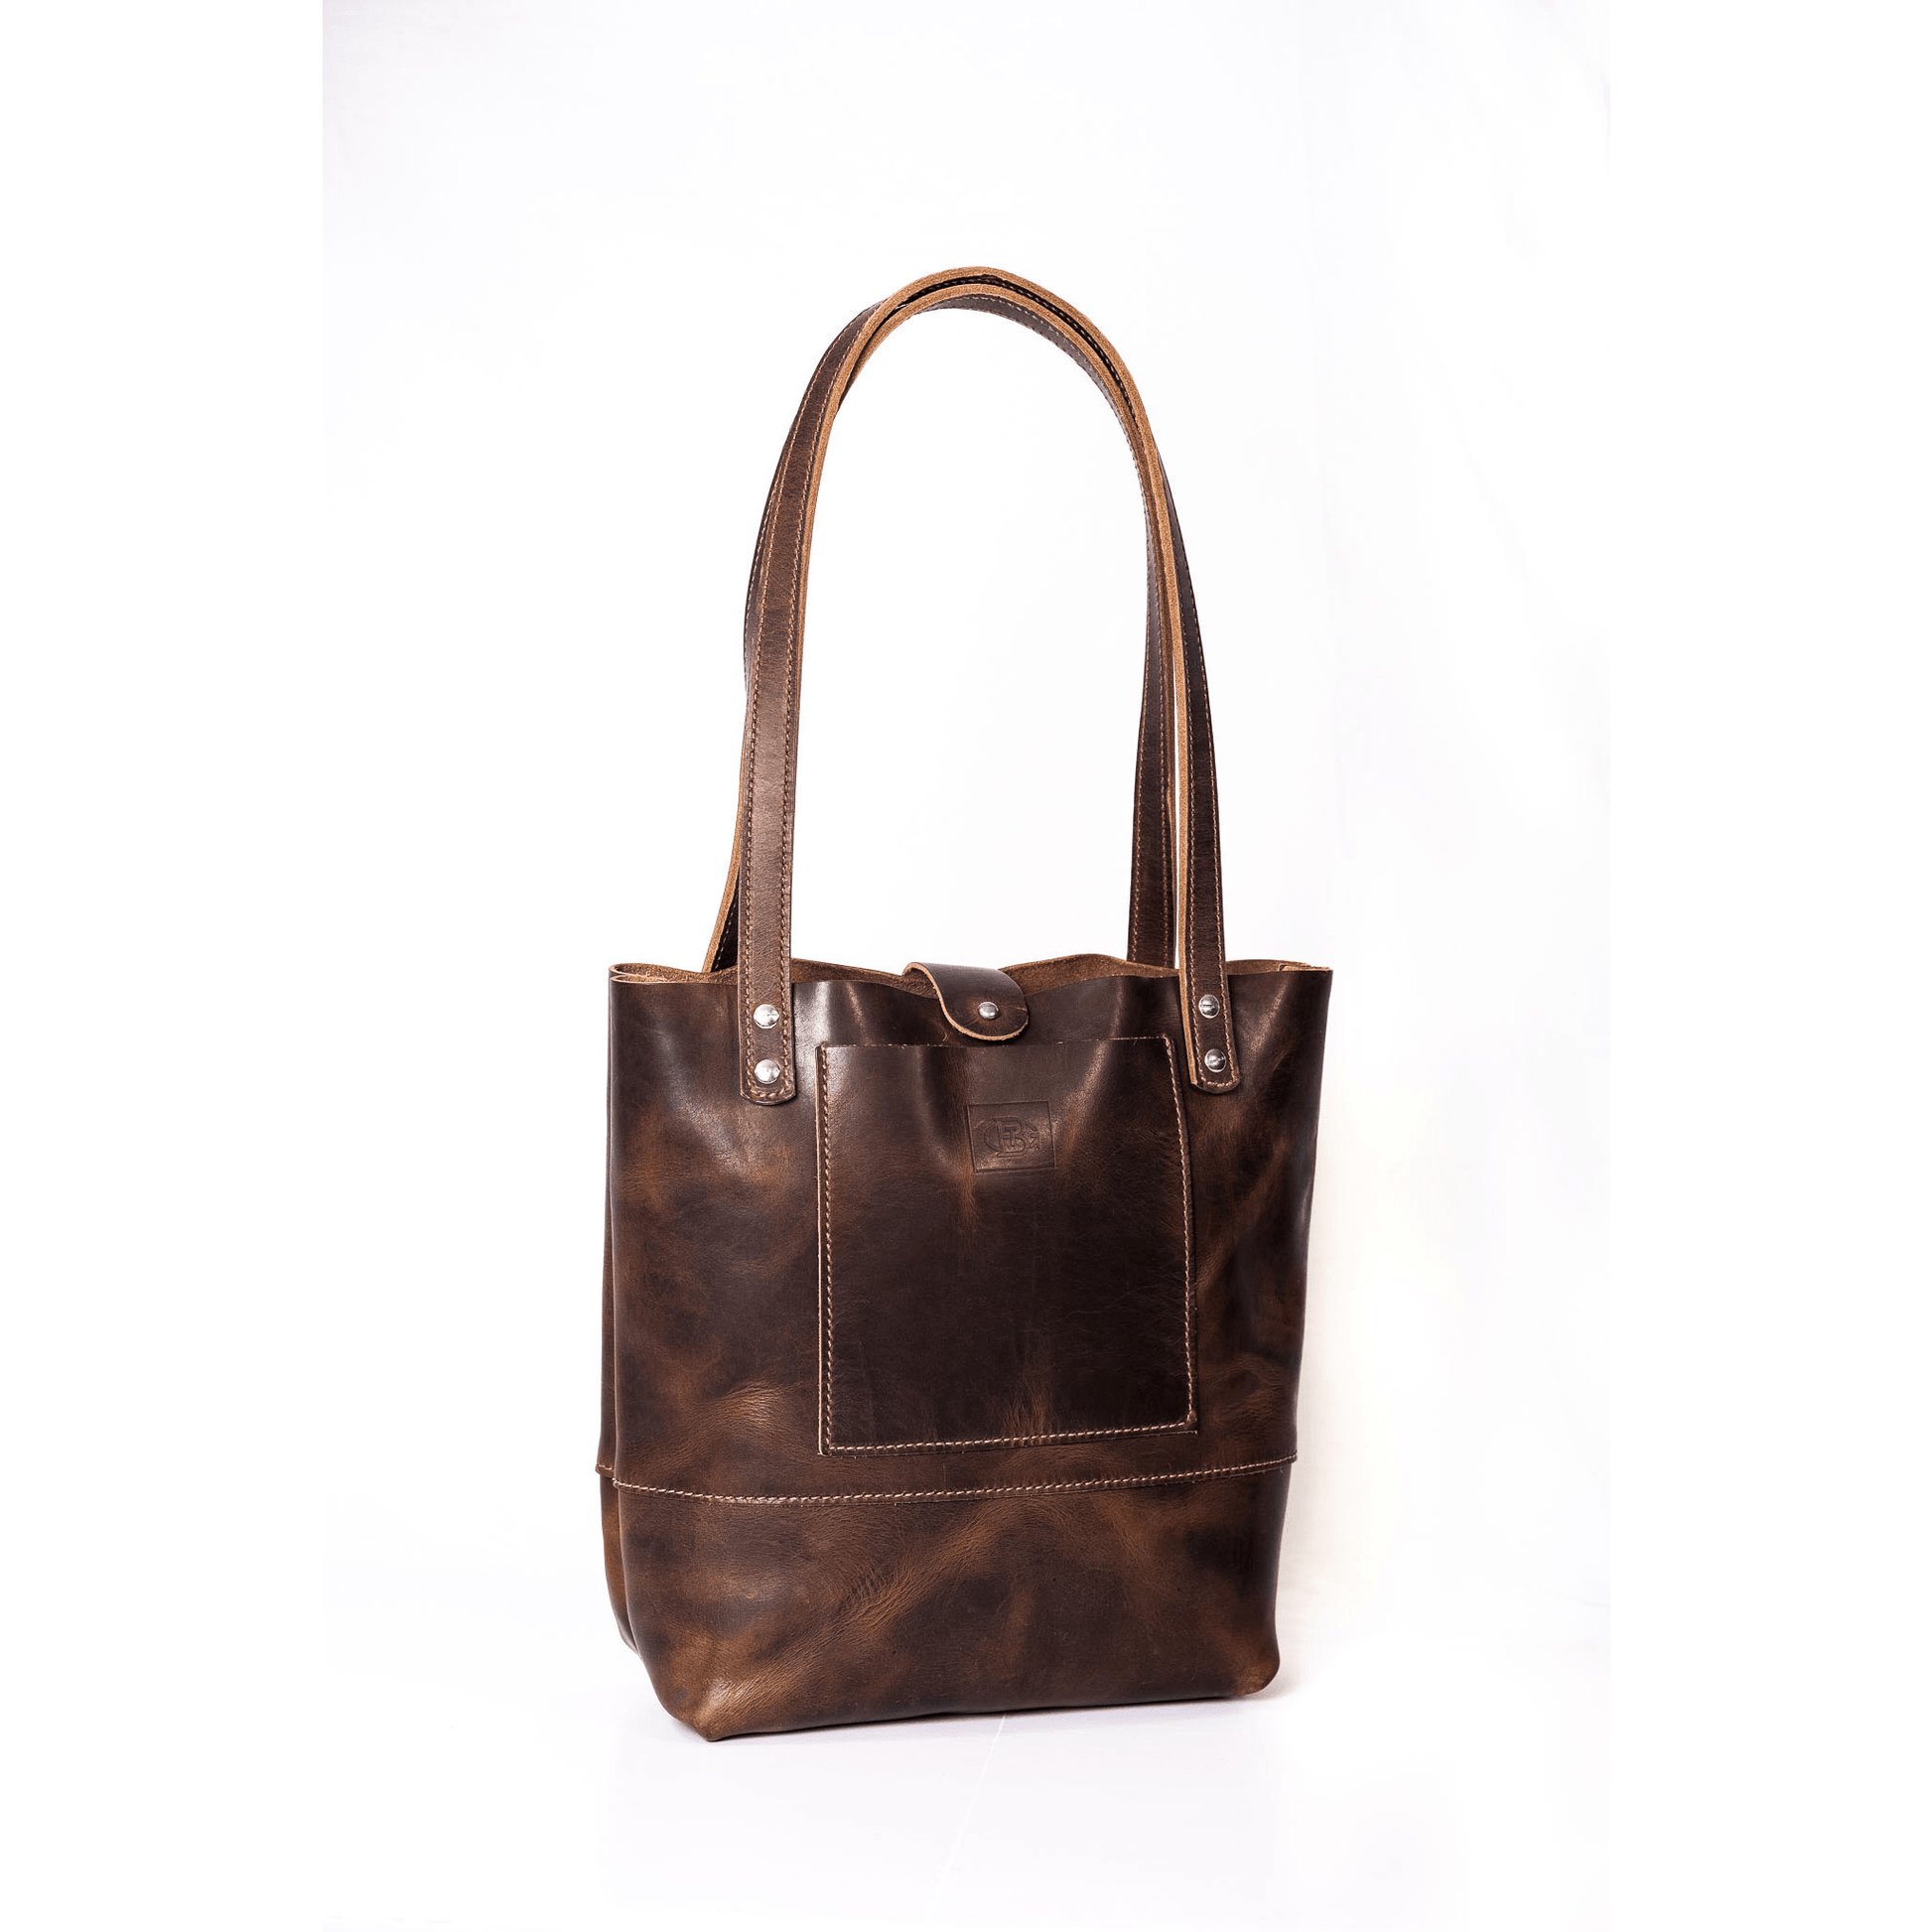 Grayson Travel Tote - Horween Dublin Leather in Brown Nut - Bluetross Golf